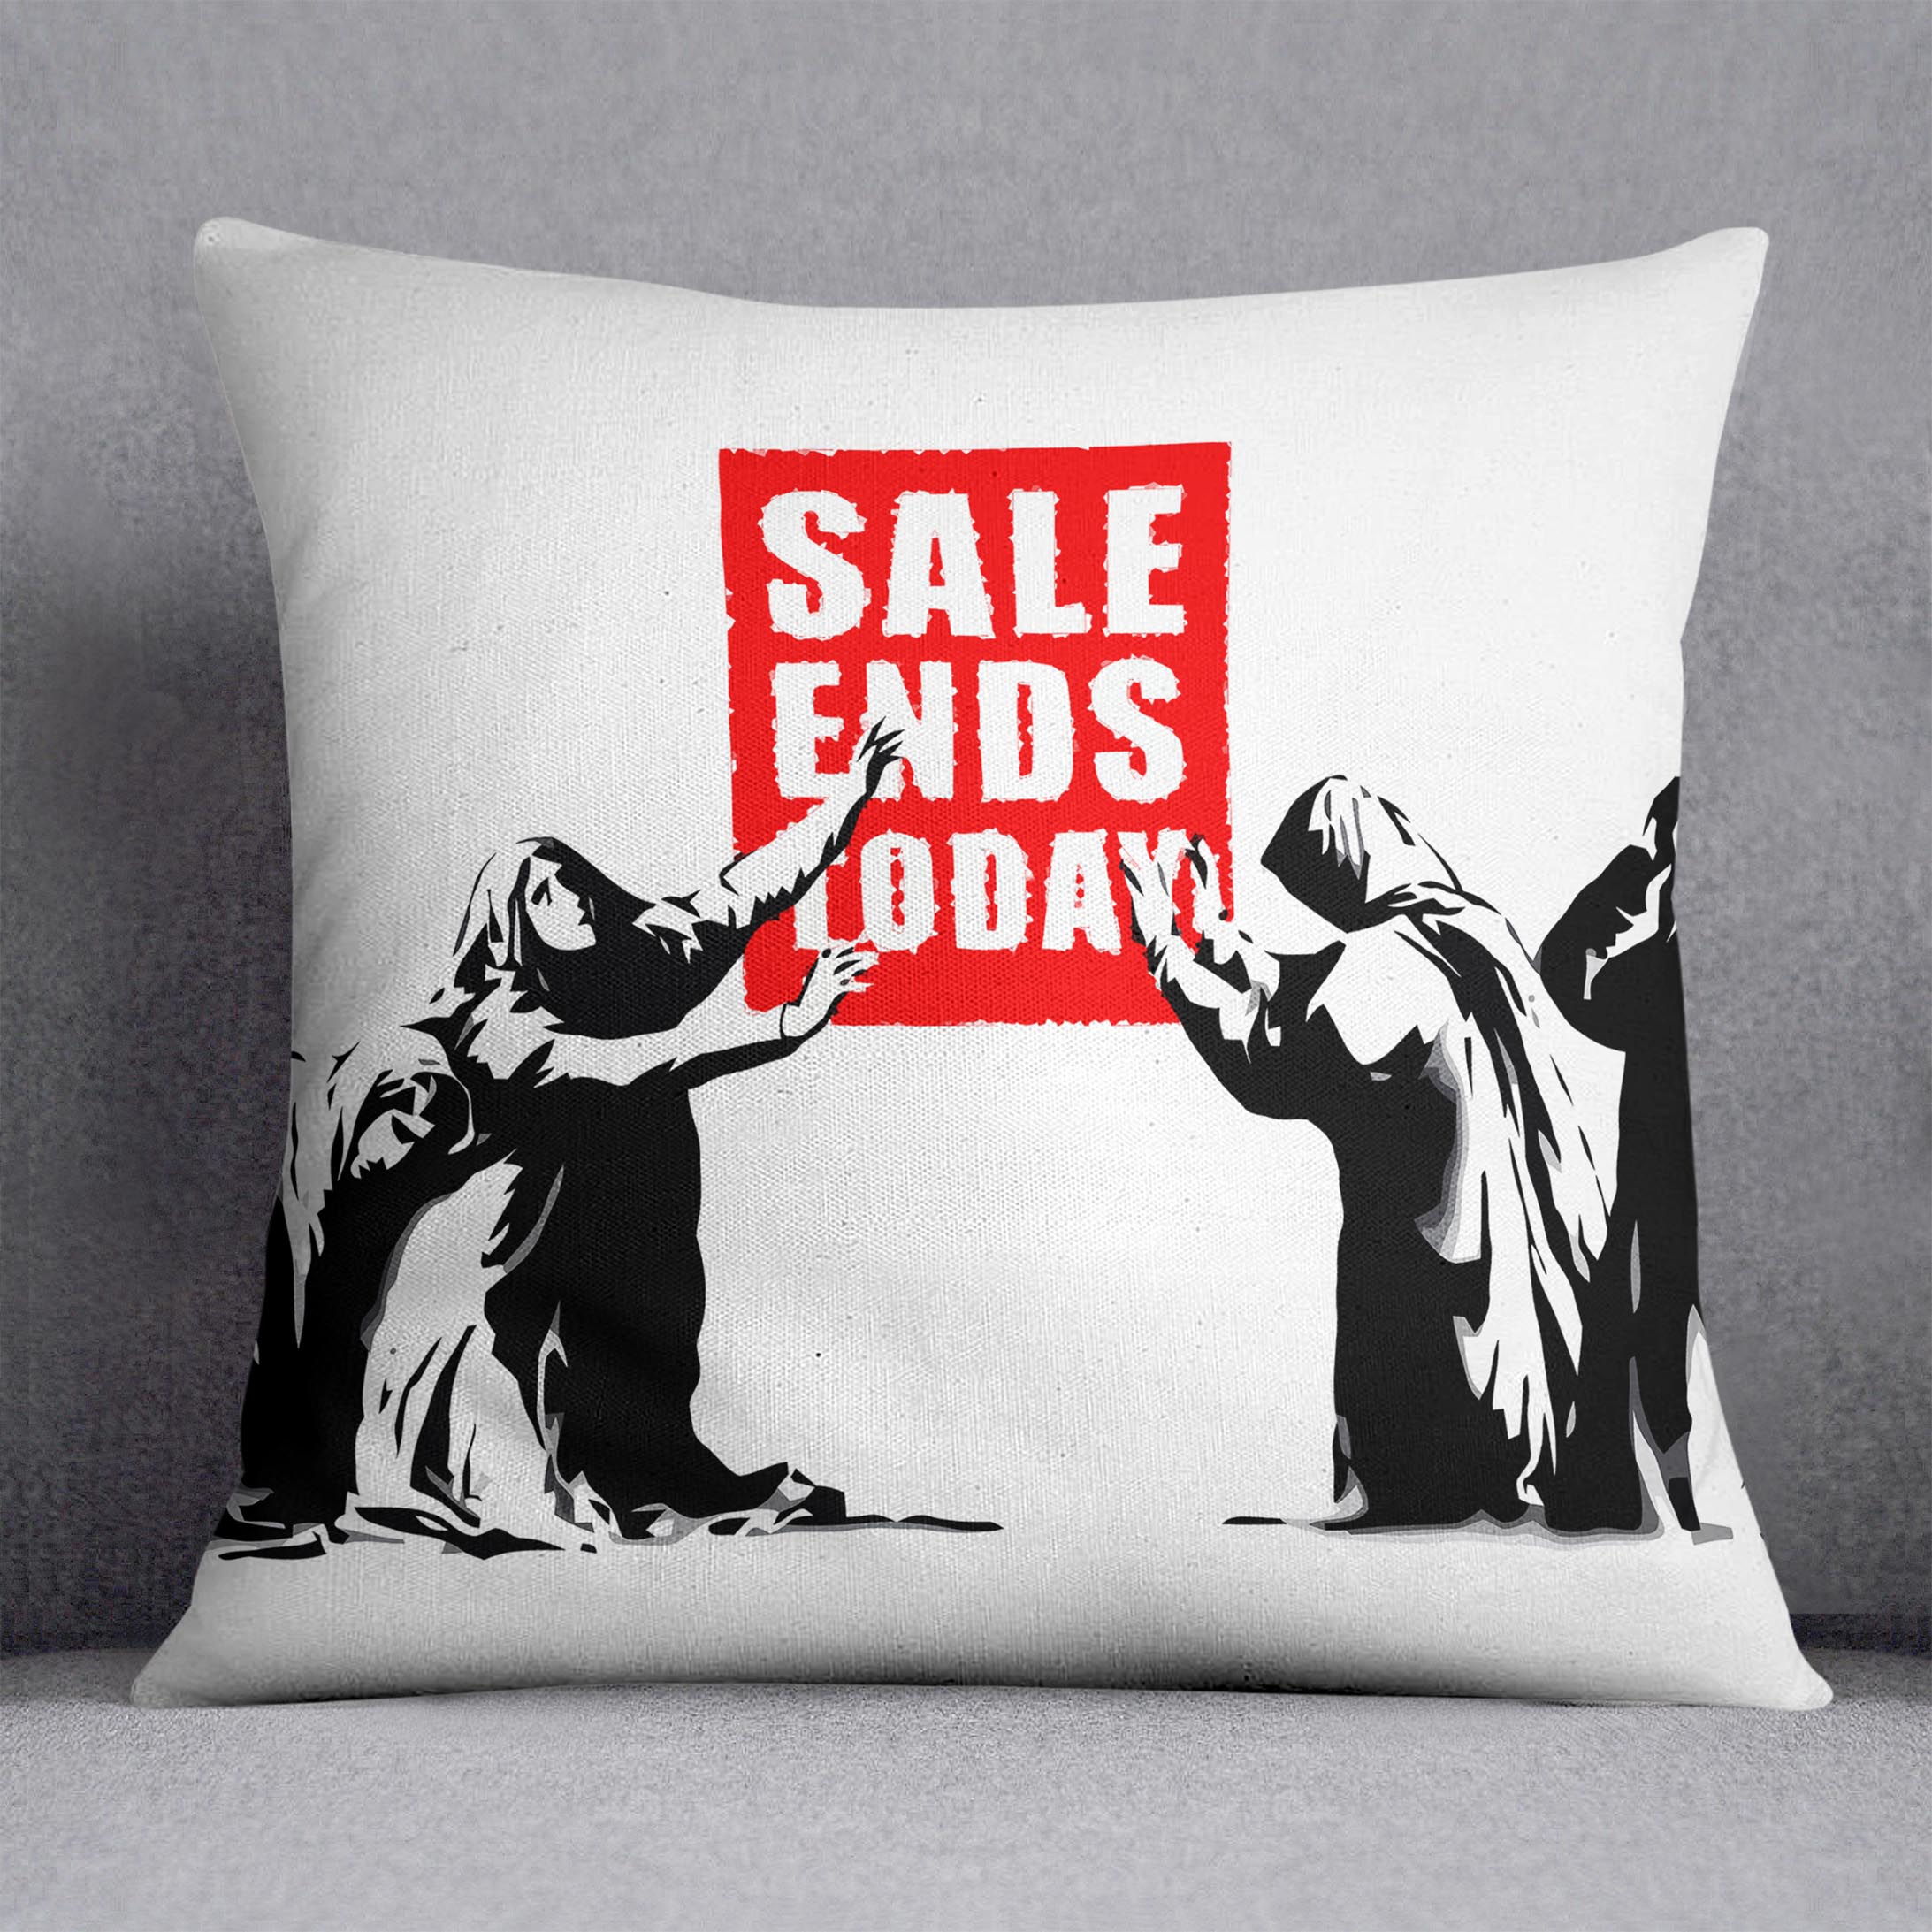 Banksy Sale Ends Today Cushion